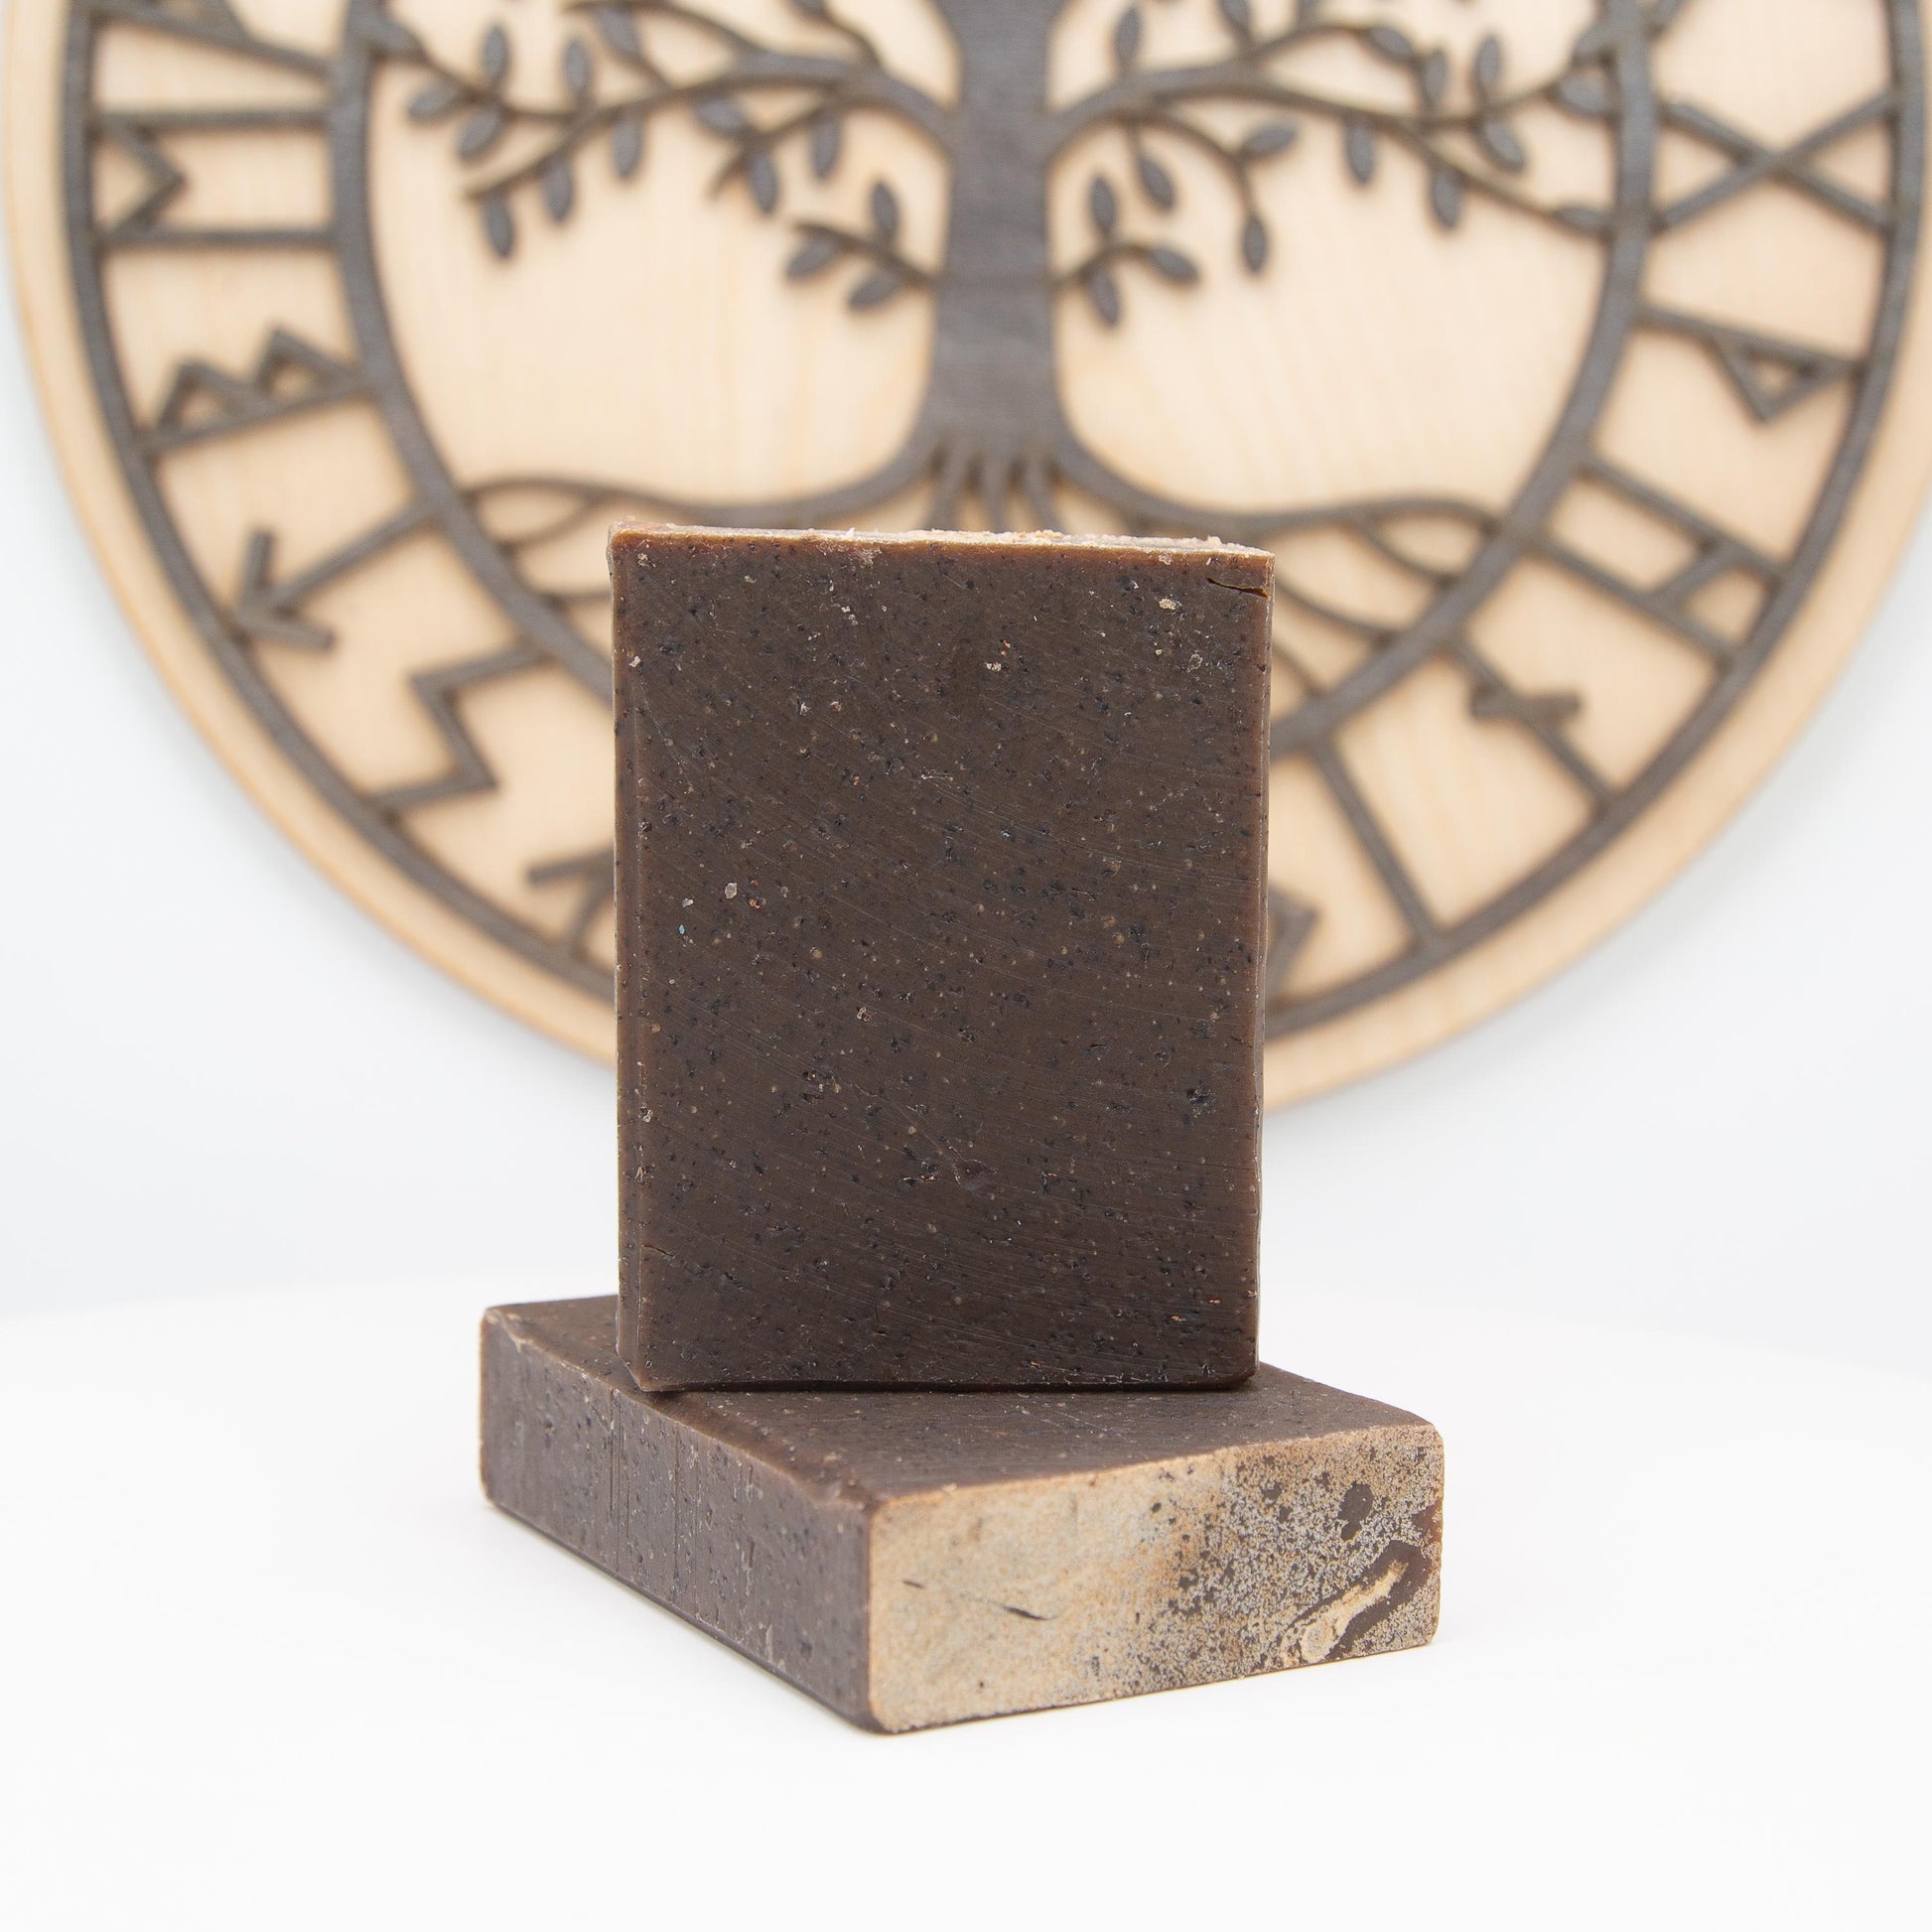 Fehu Coffee Soap- Coffee, Hickory, and Suede, Birds of Valhalla, Limited, Birds of Valhalla